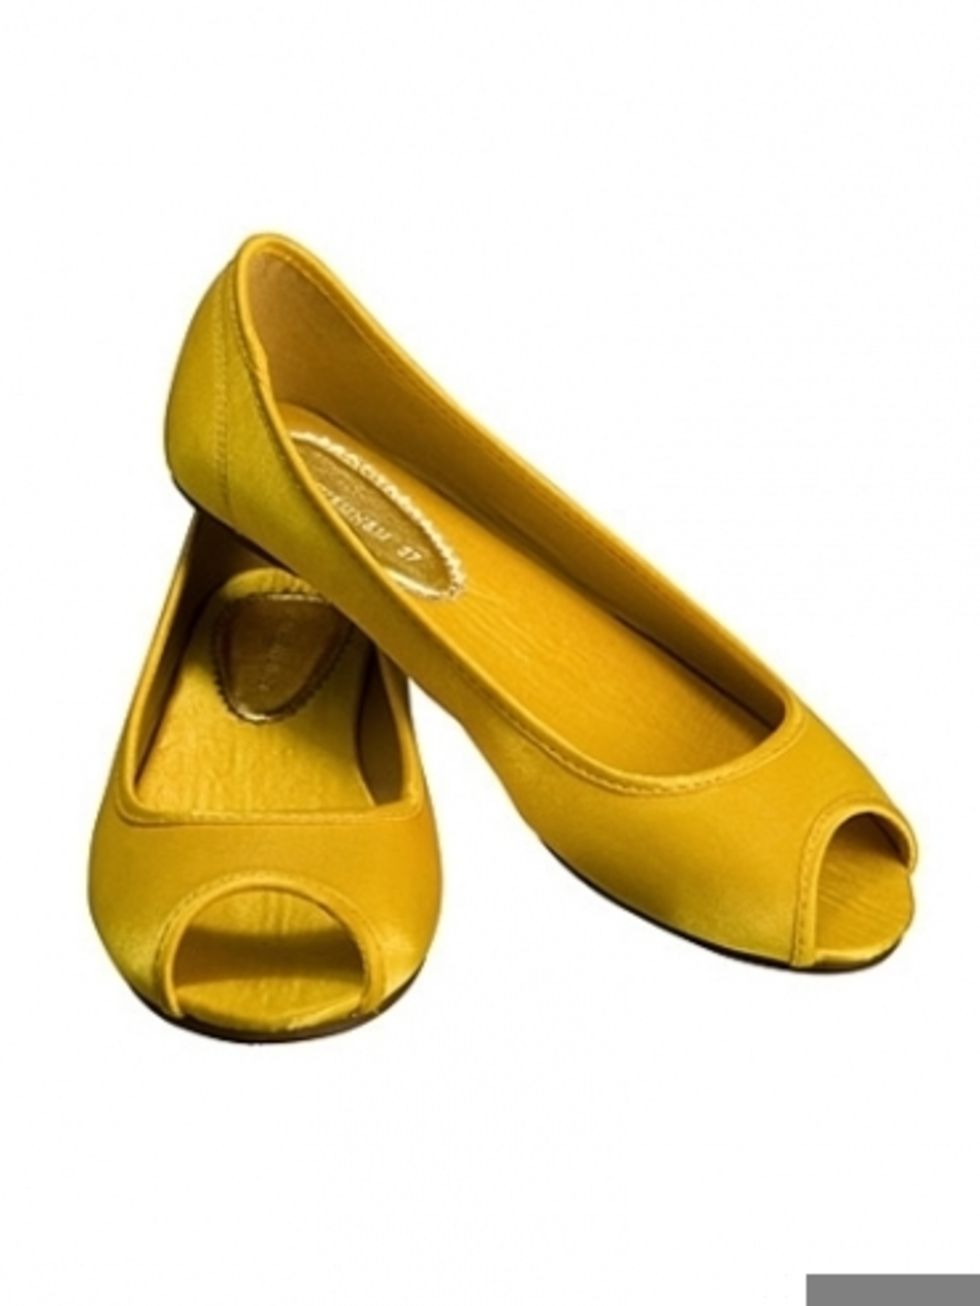 Yellow, Tan, Beige, Material property, Dress shoe, Fashion design, Leather, Ballet flat, Natural material, 